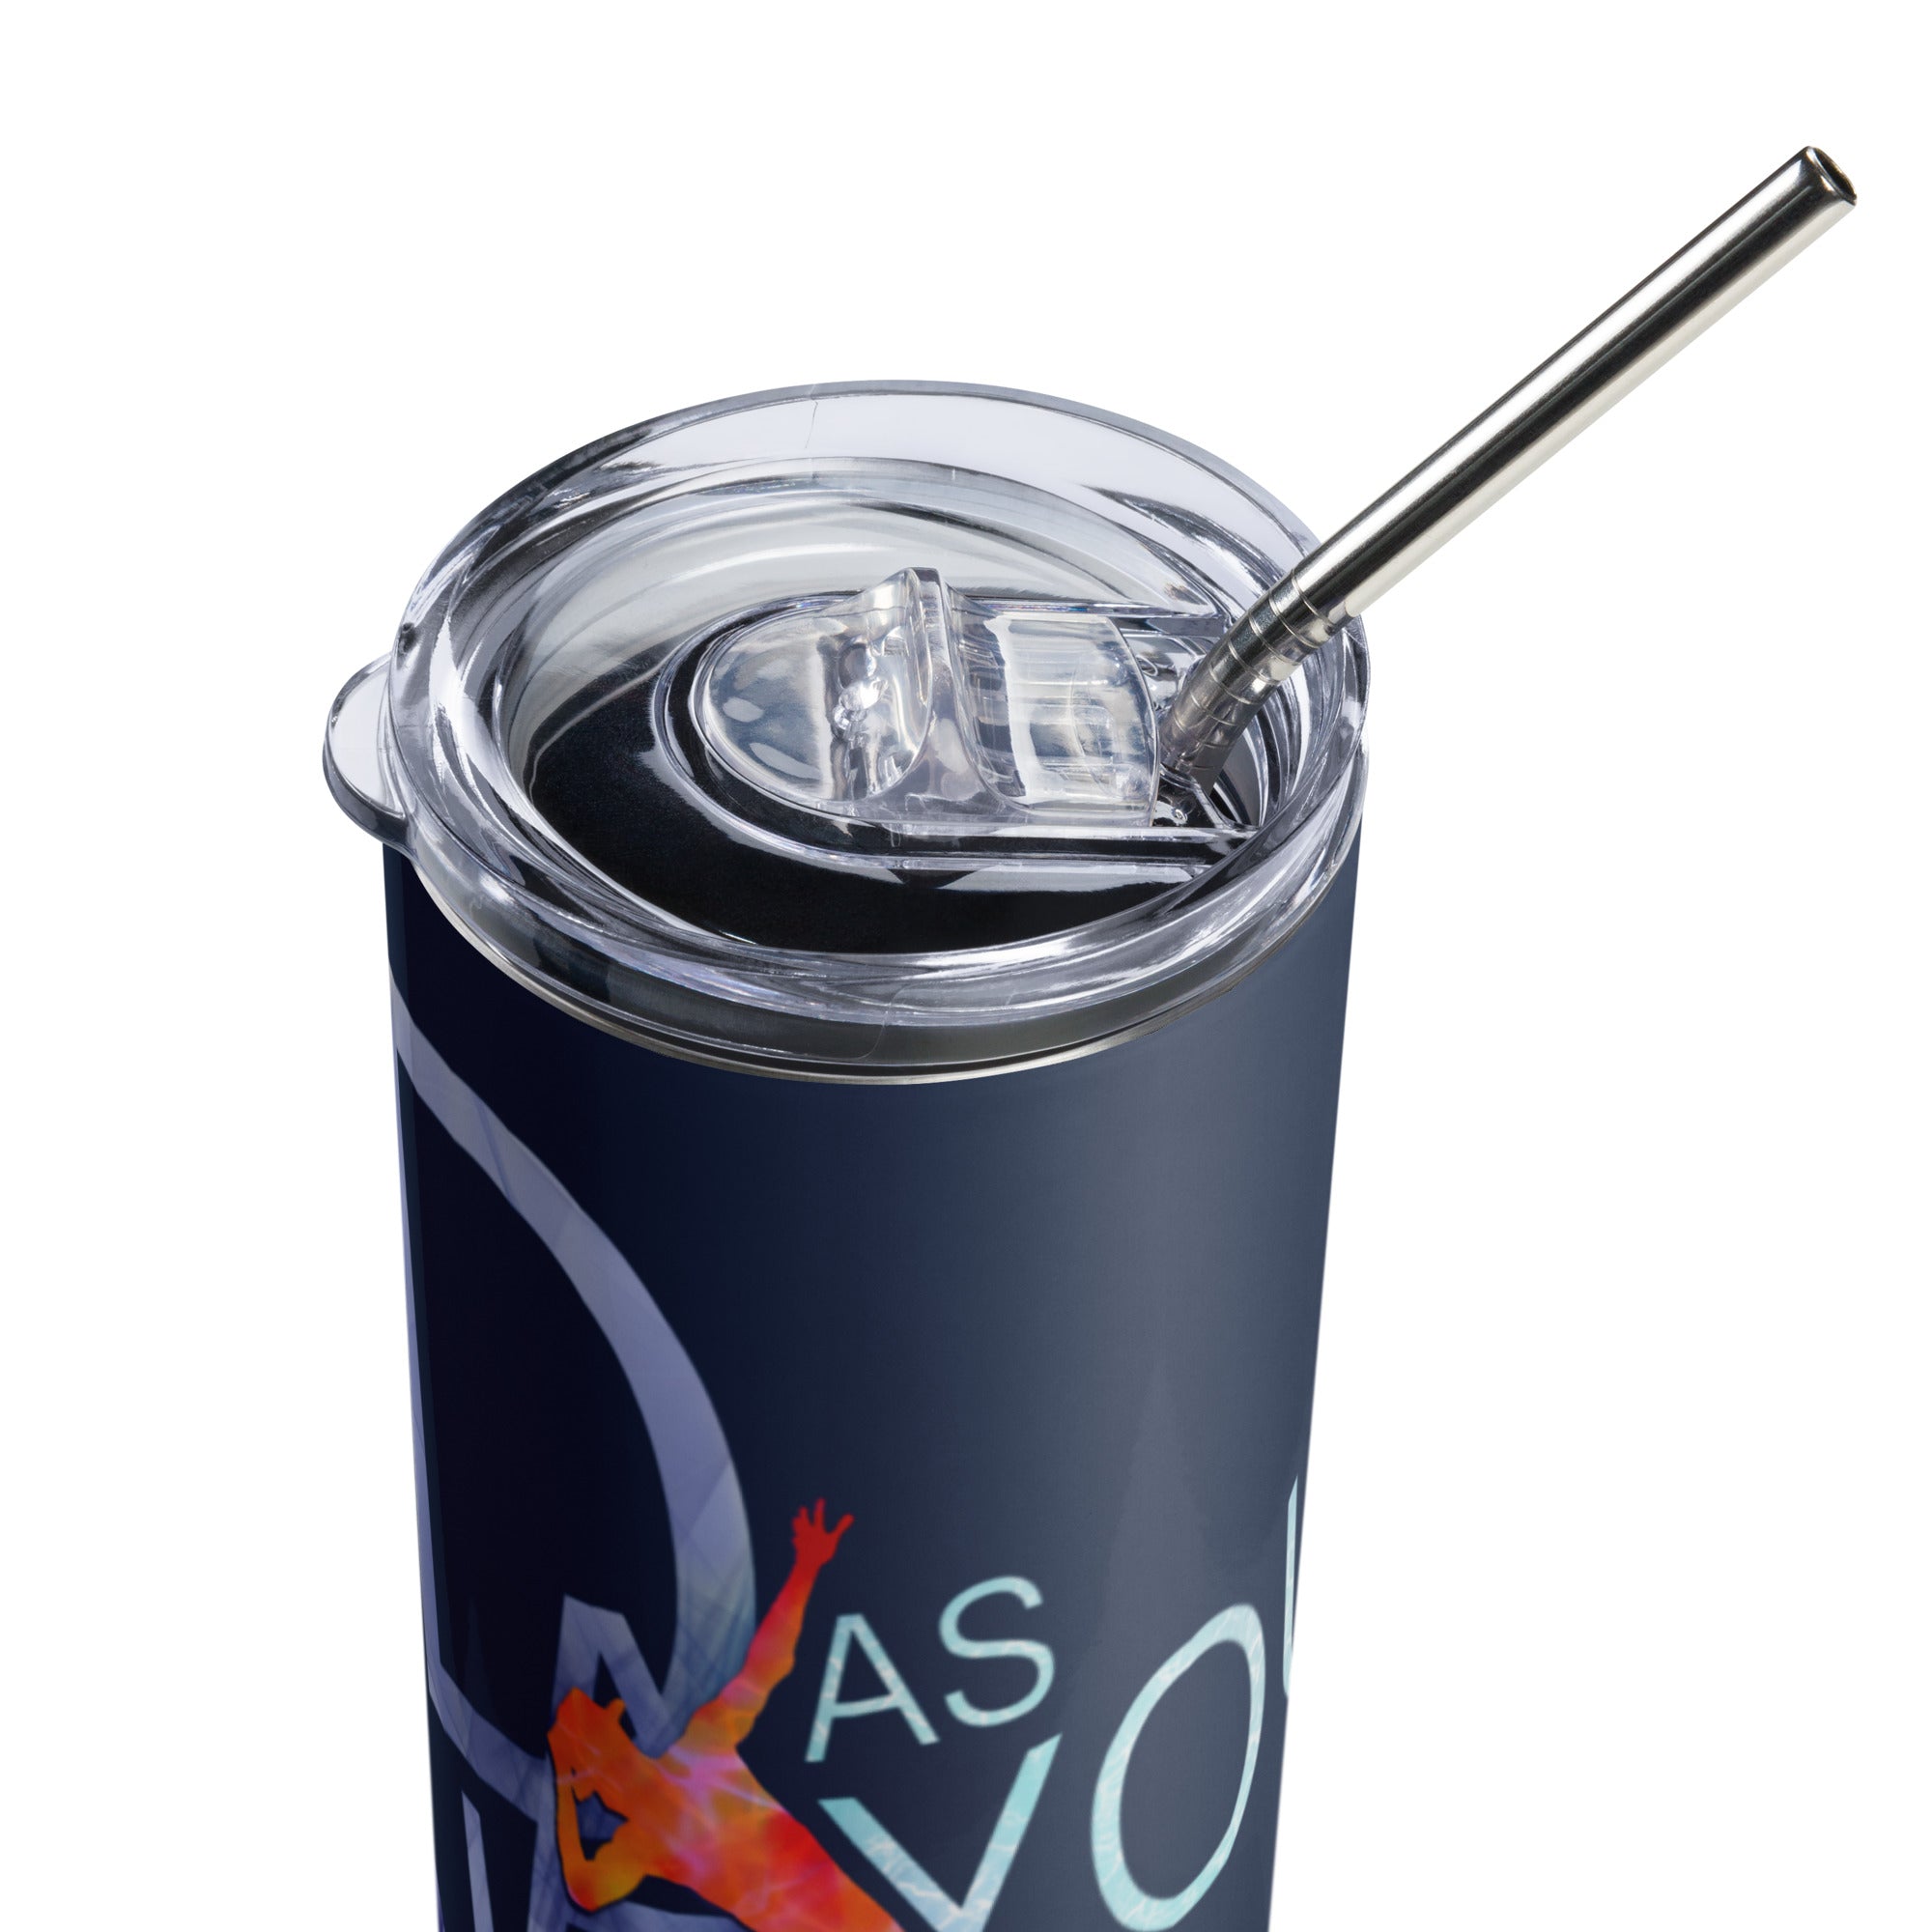 DAnce As You Are - Stainless steel tumbler